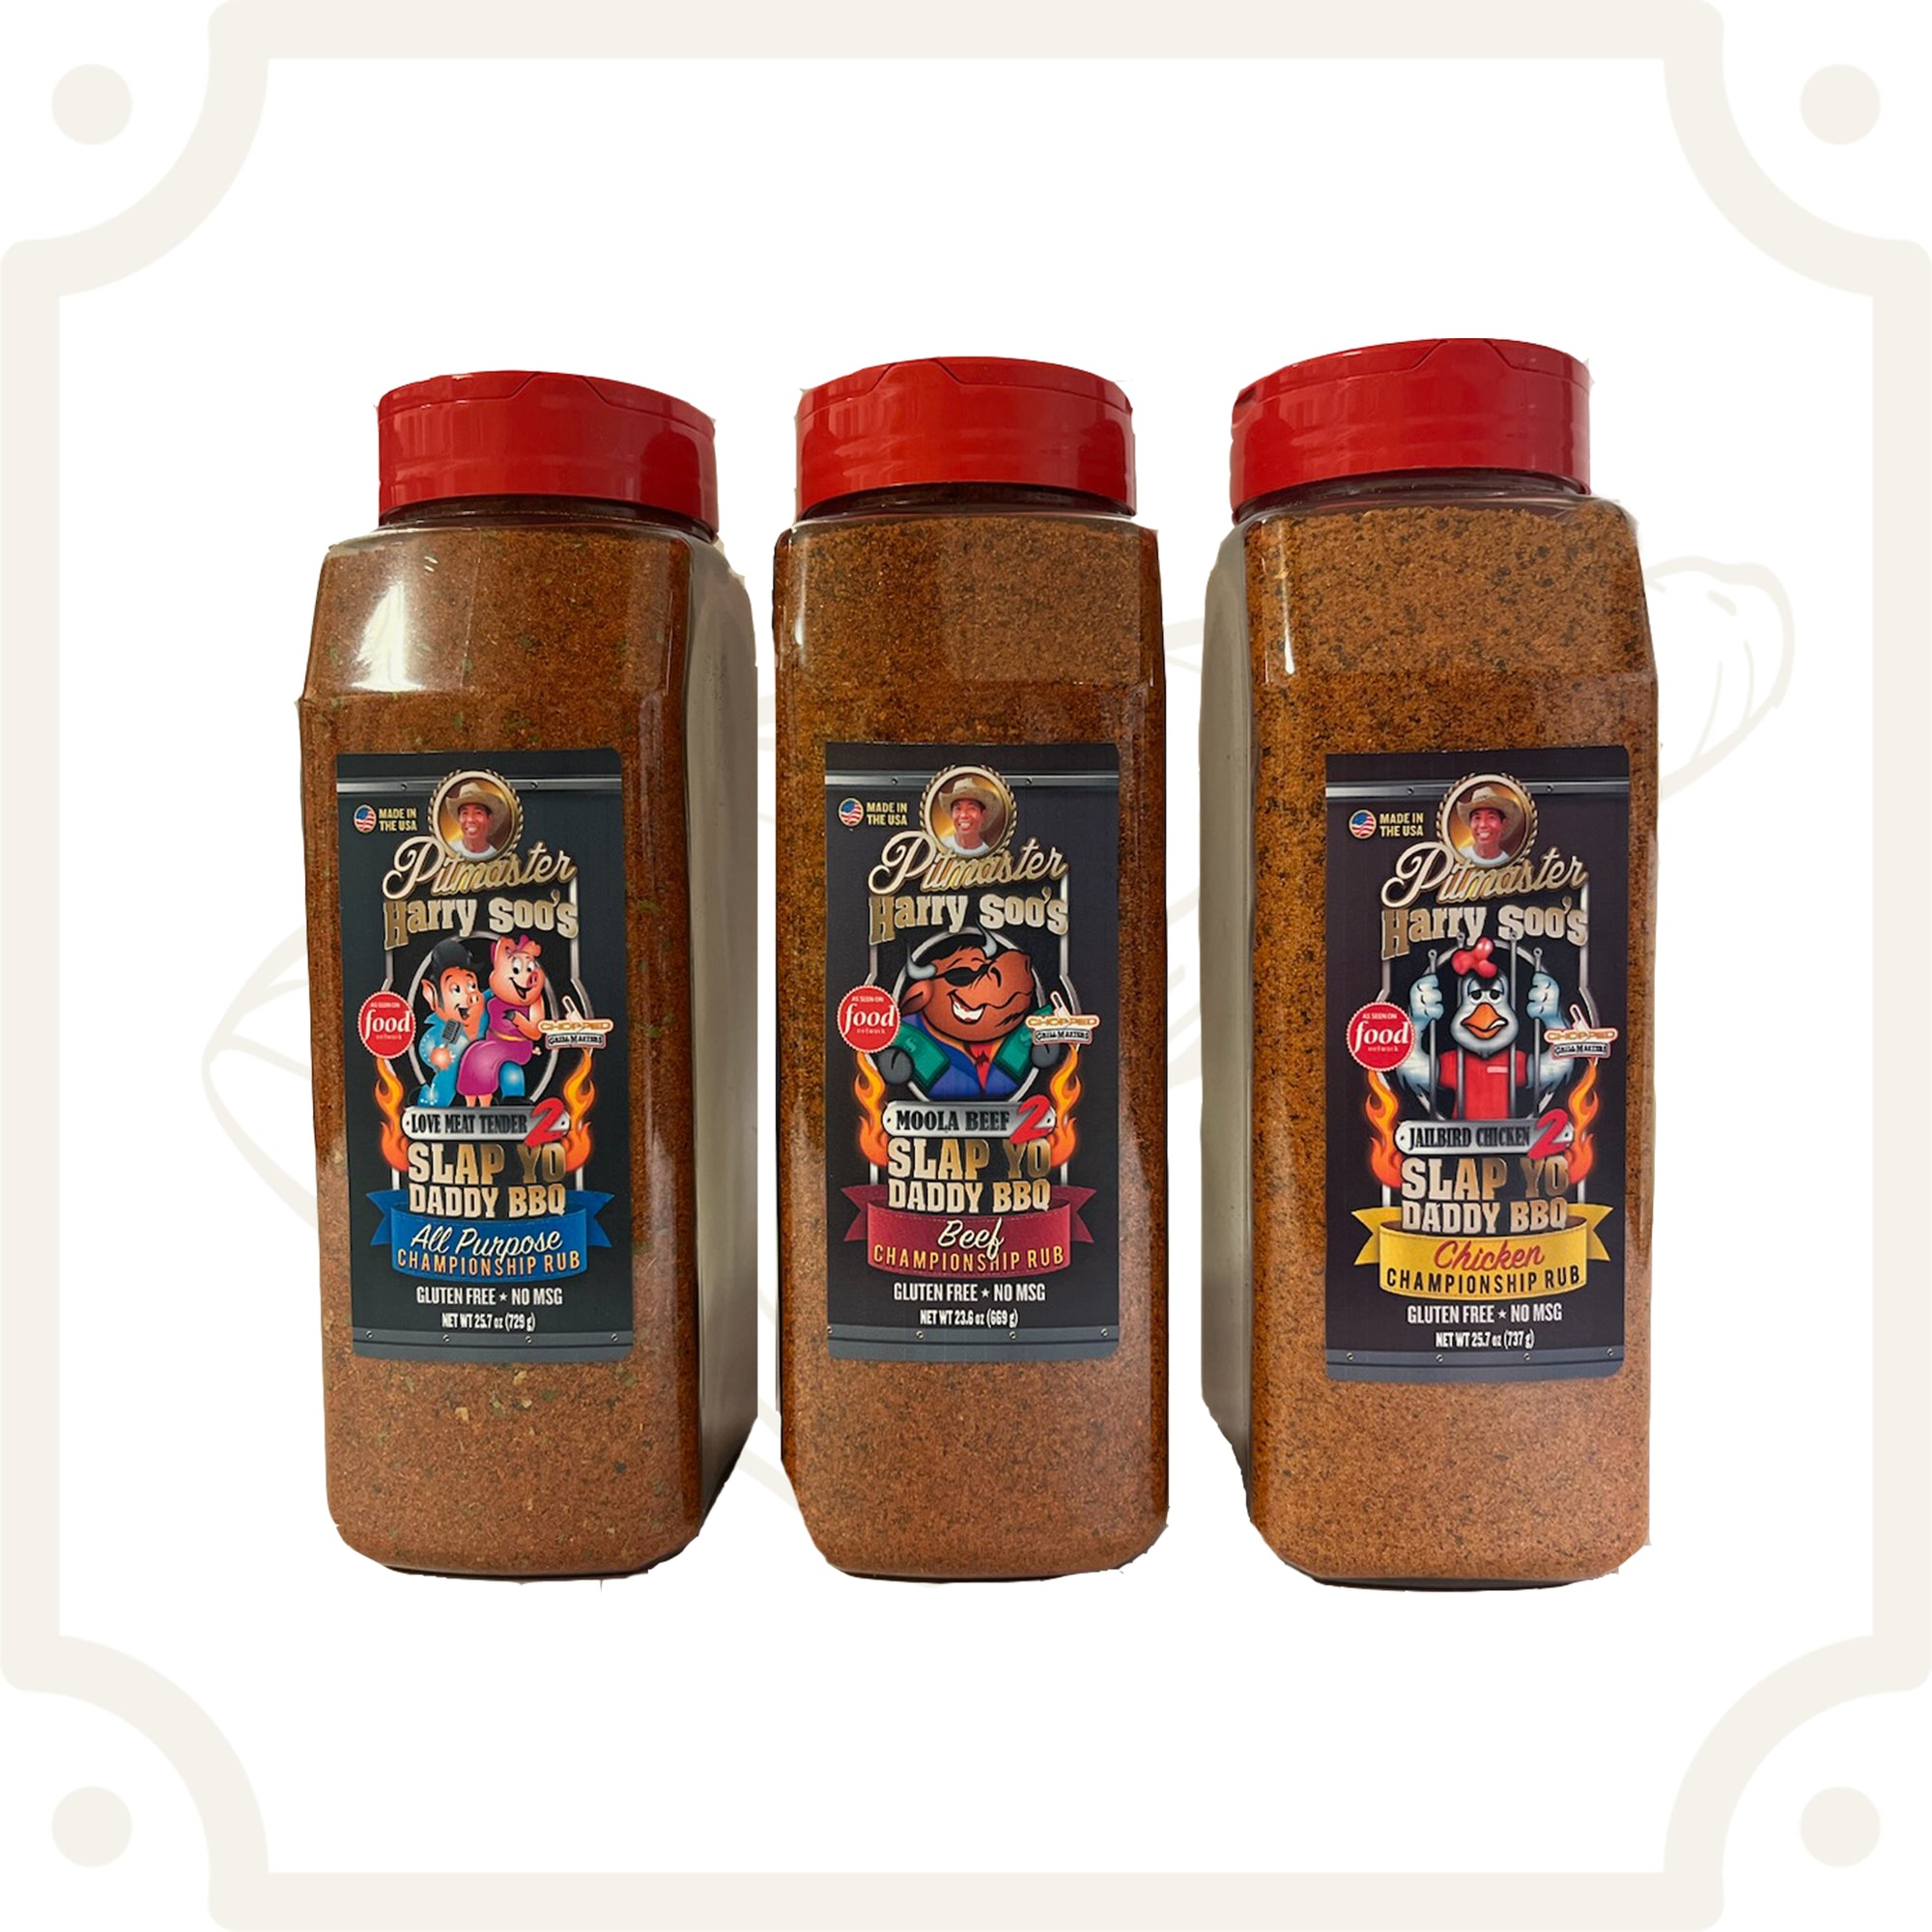 SYD 3 Pack of 26 oz Rubs: All Purpose v2.0, Beef v2.0 and Chicken v2.0